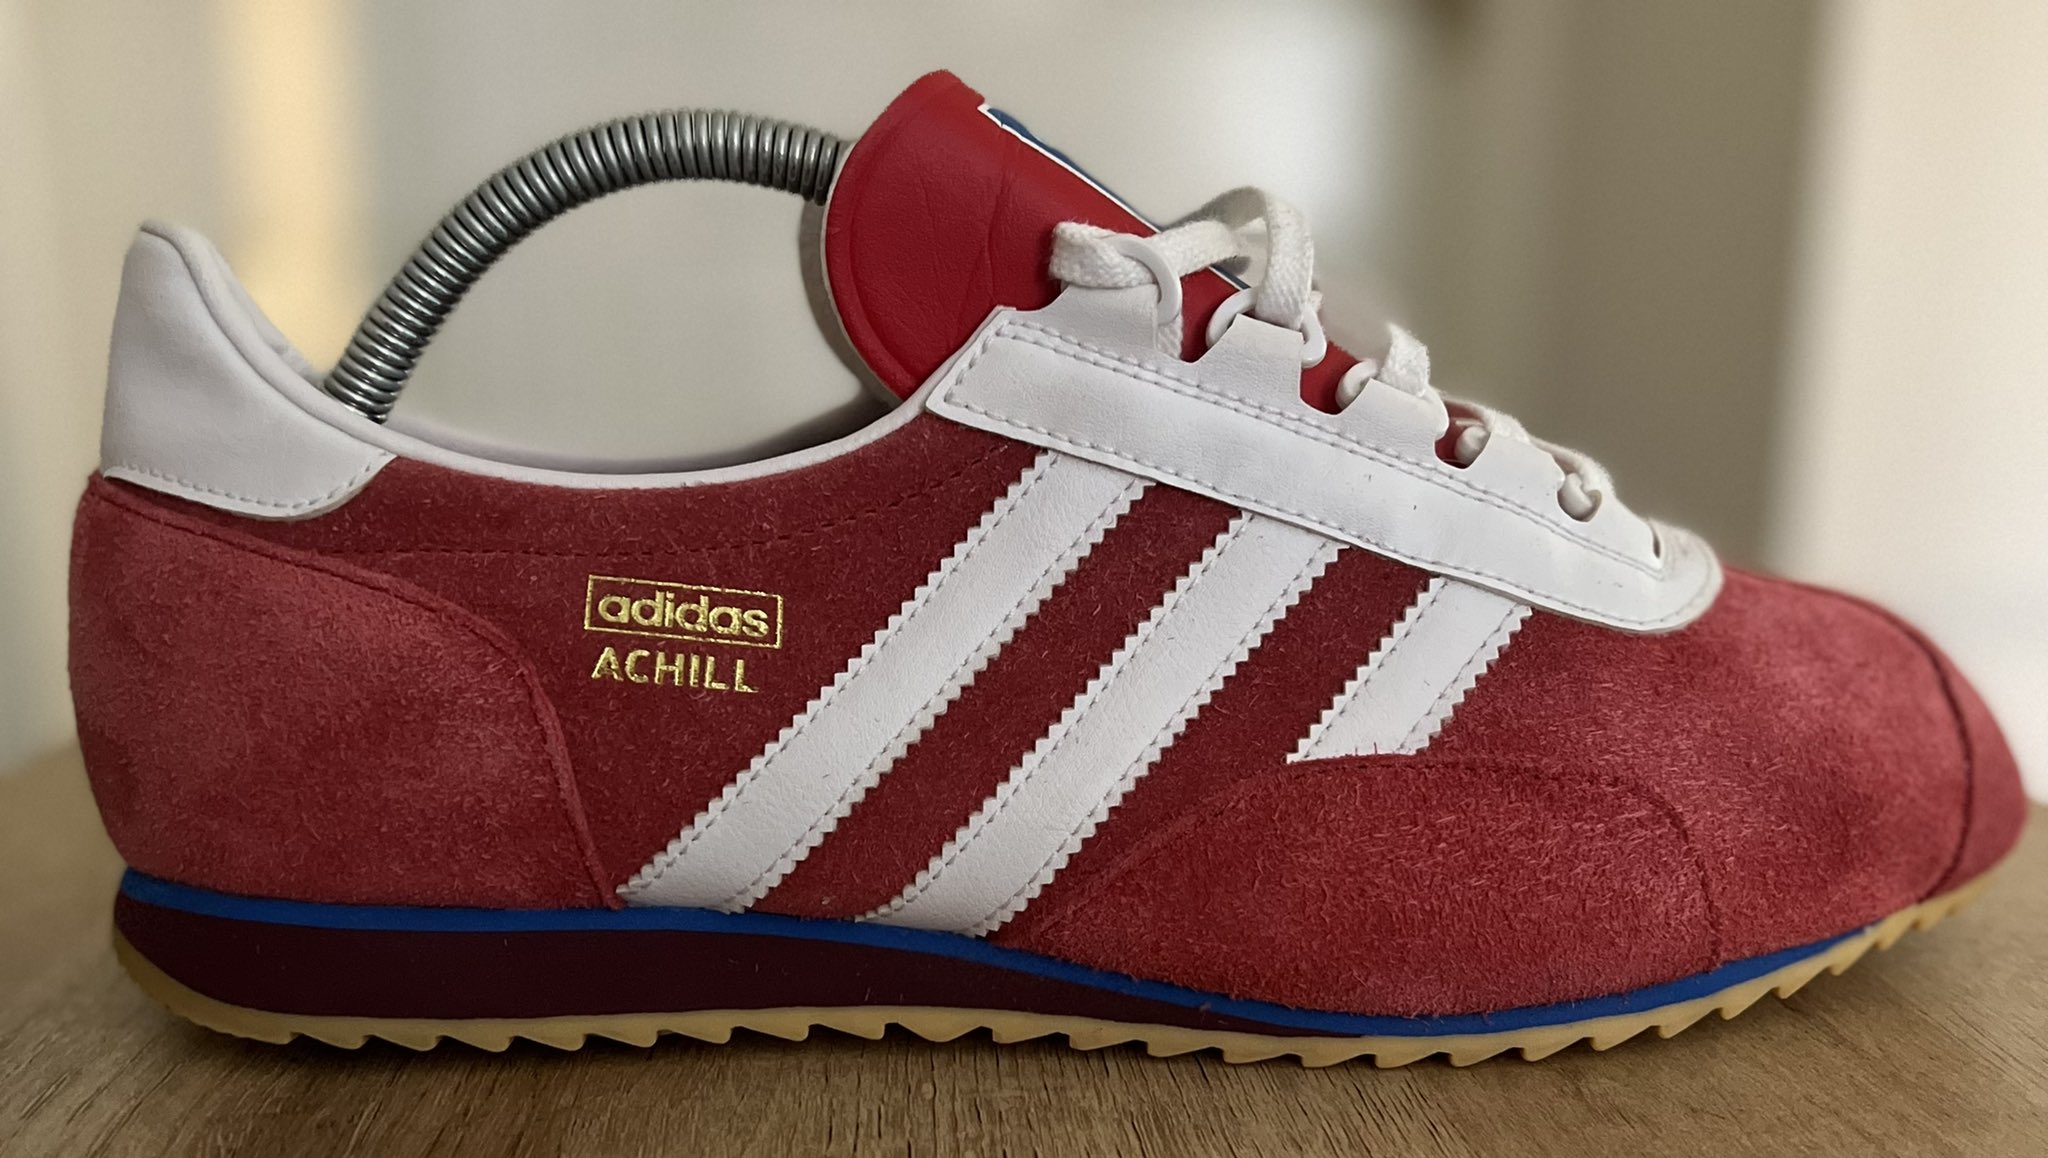 Converteren overschreden pad P_KOVS on Twitter: "🔥🔥🔥🔥FOR SALE🔥🔥🔥🔥 adidas Achill from 07/11 -  size 8 BNIB ( no tags unfortunately) Looking to get back what I paid £140  TYD - maybe open to very sensible